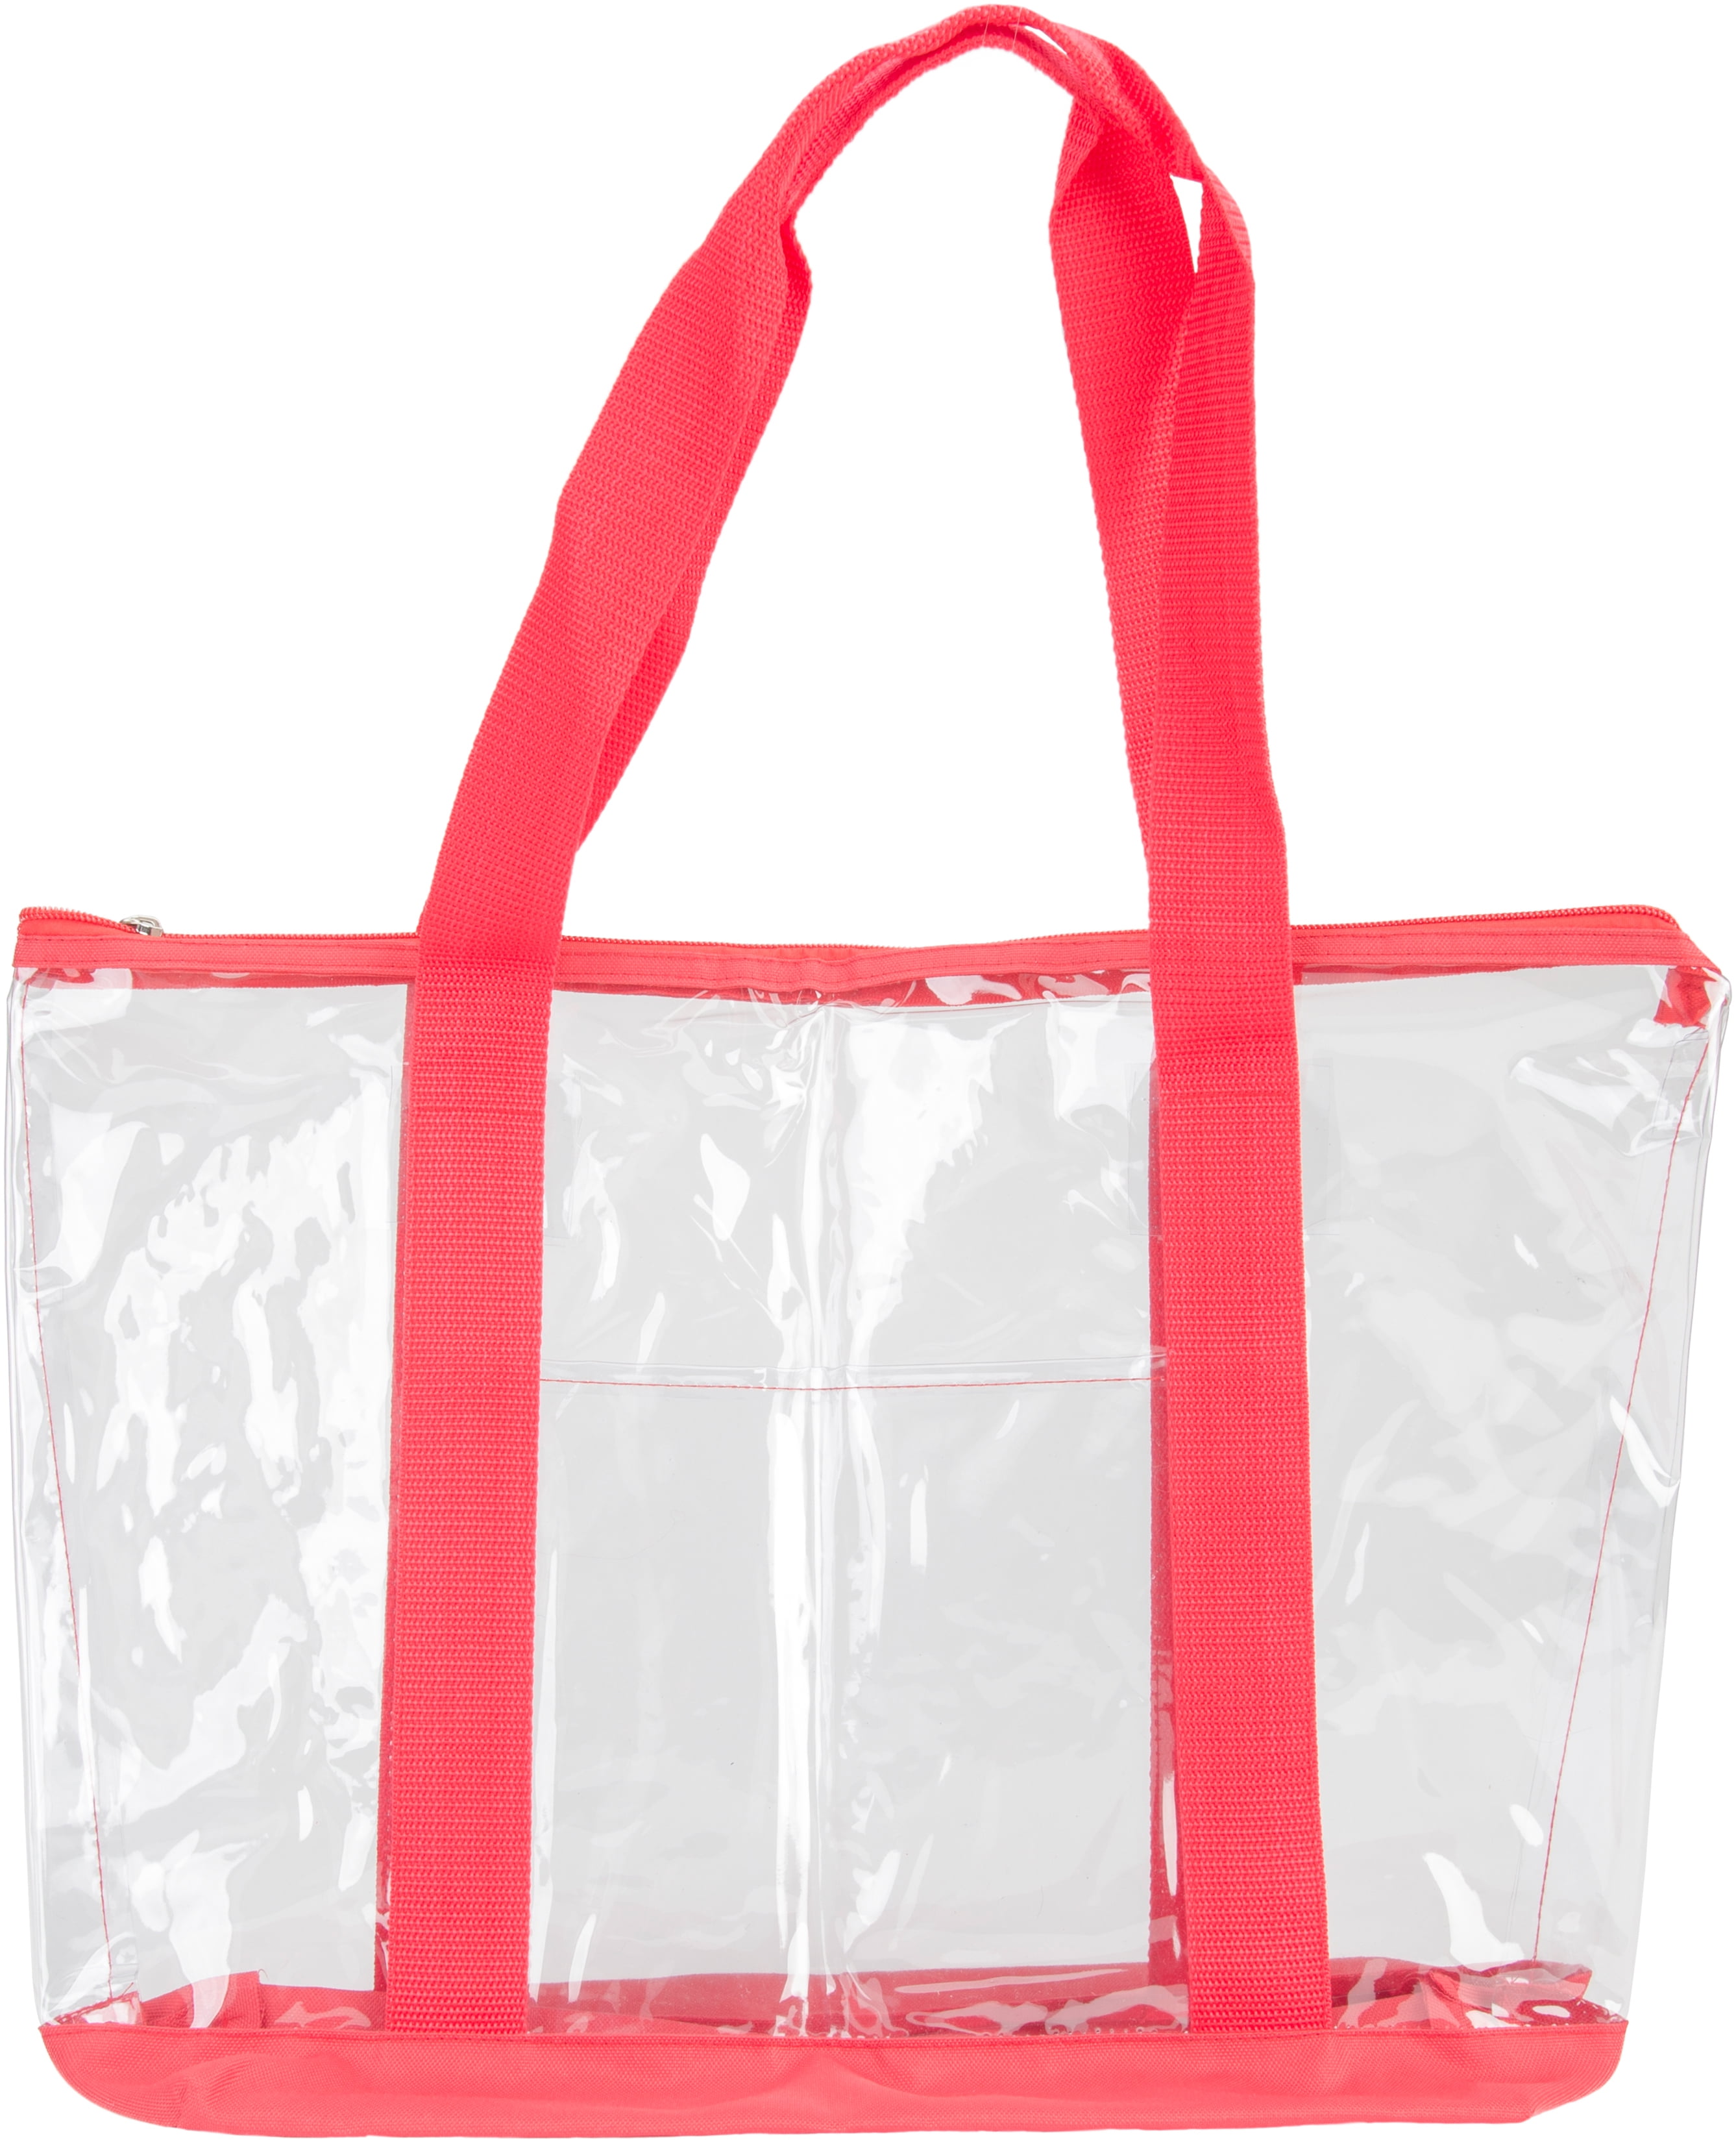 Innovative Home Creations AllPurpose Clear Tote BagRed 19